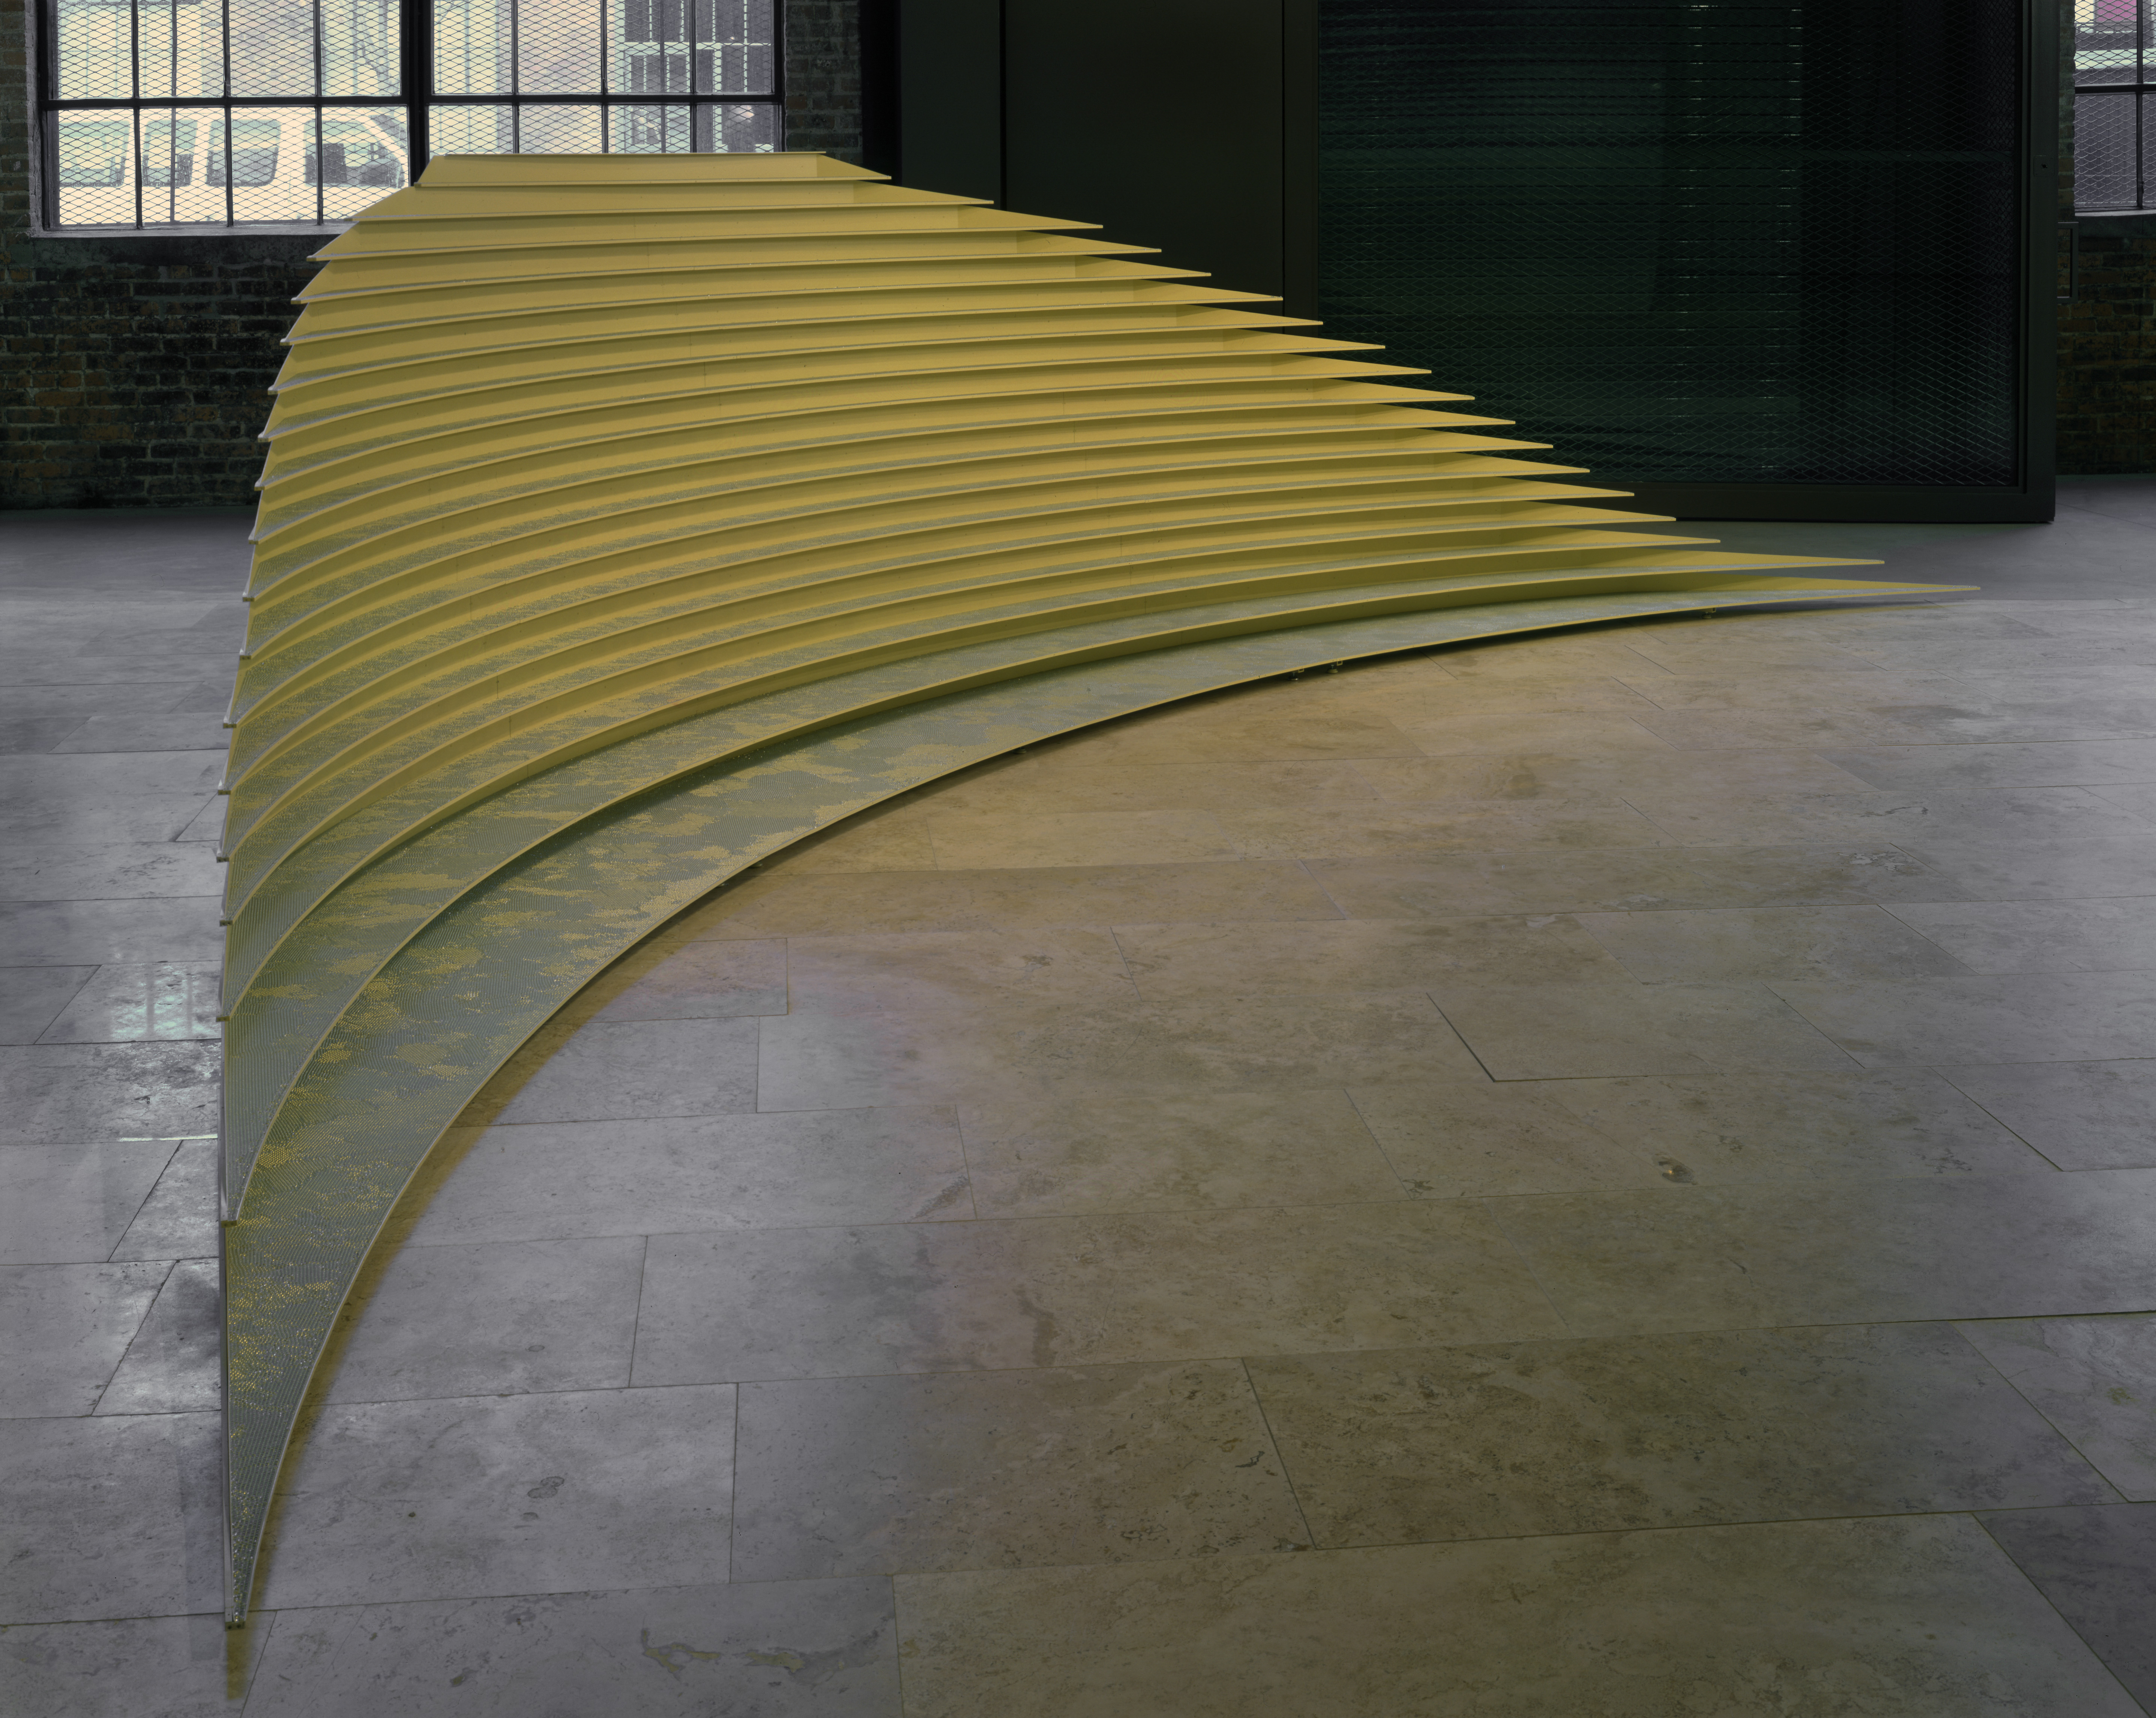 Dune, 2002. Painted aluminum, glass beads, 336 x 60 x 96 inches. Courtesy the artist, and Lehmann Maupin, New York and Hong Kong.